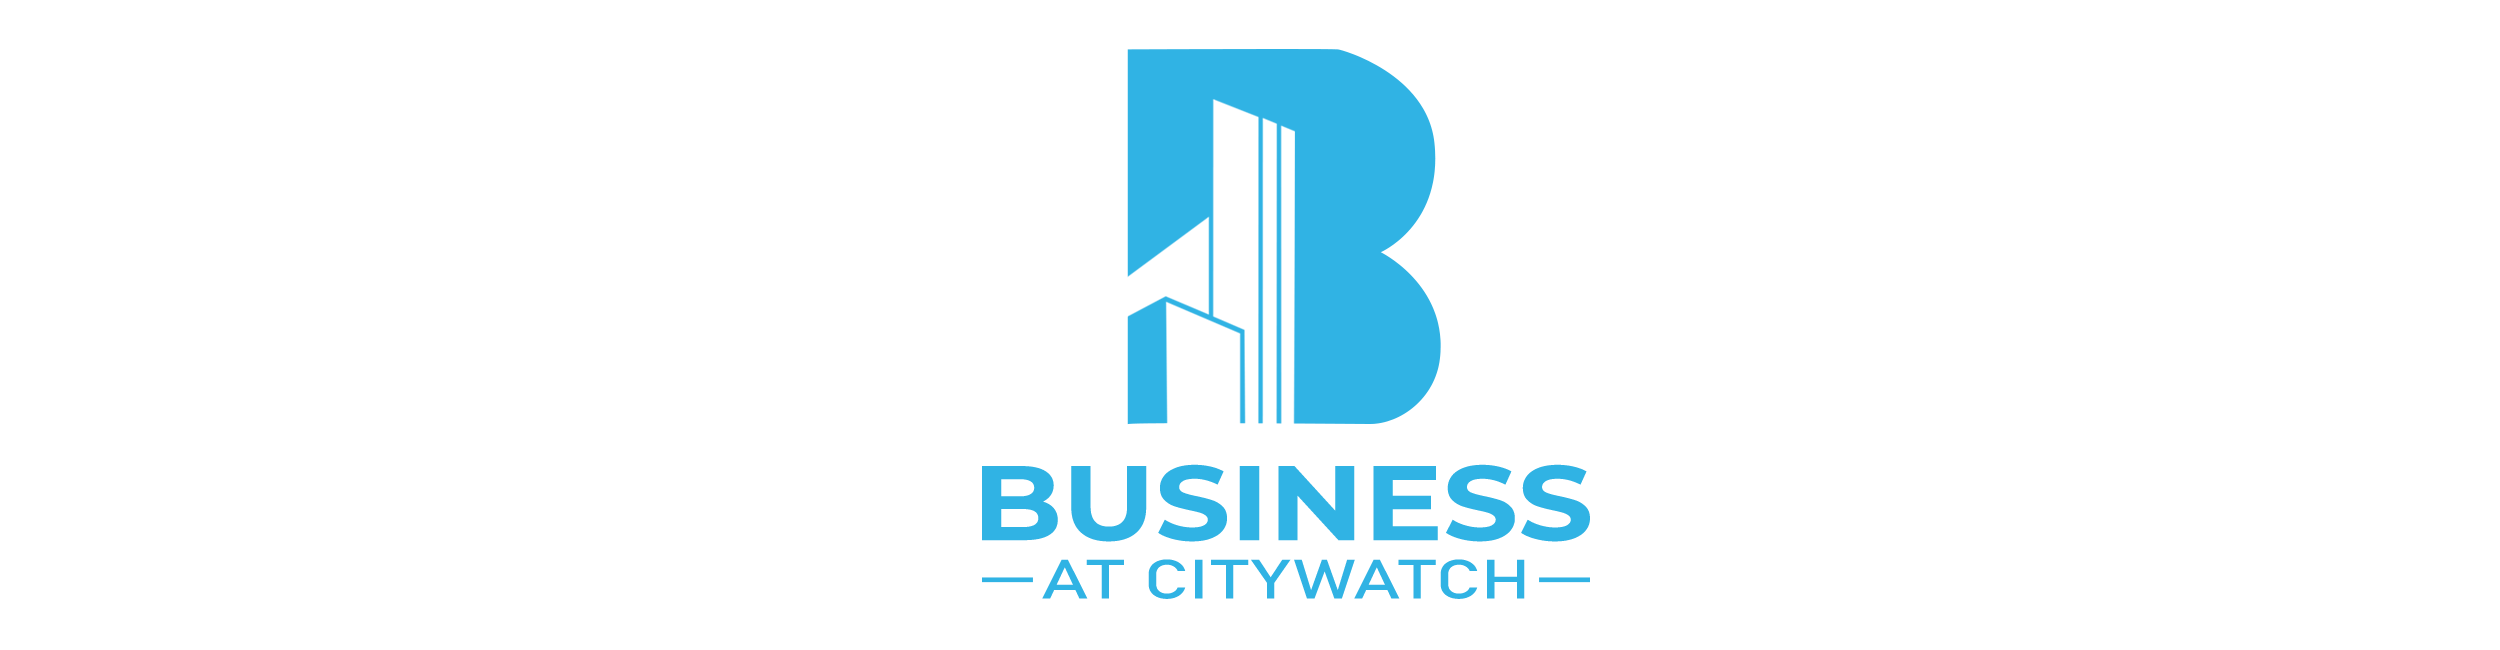 Business At Citywatch/ Sales & Marketing Tips for Small Business Owners